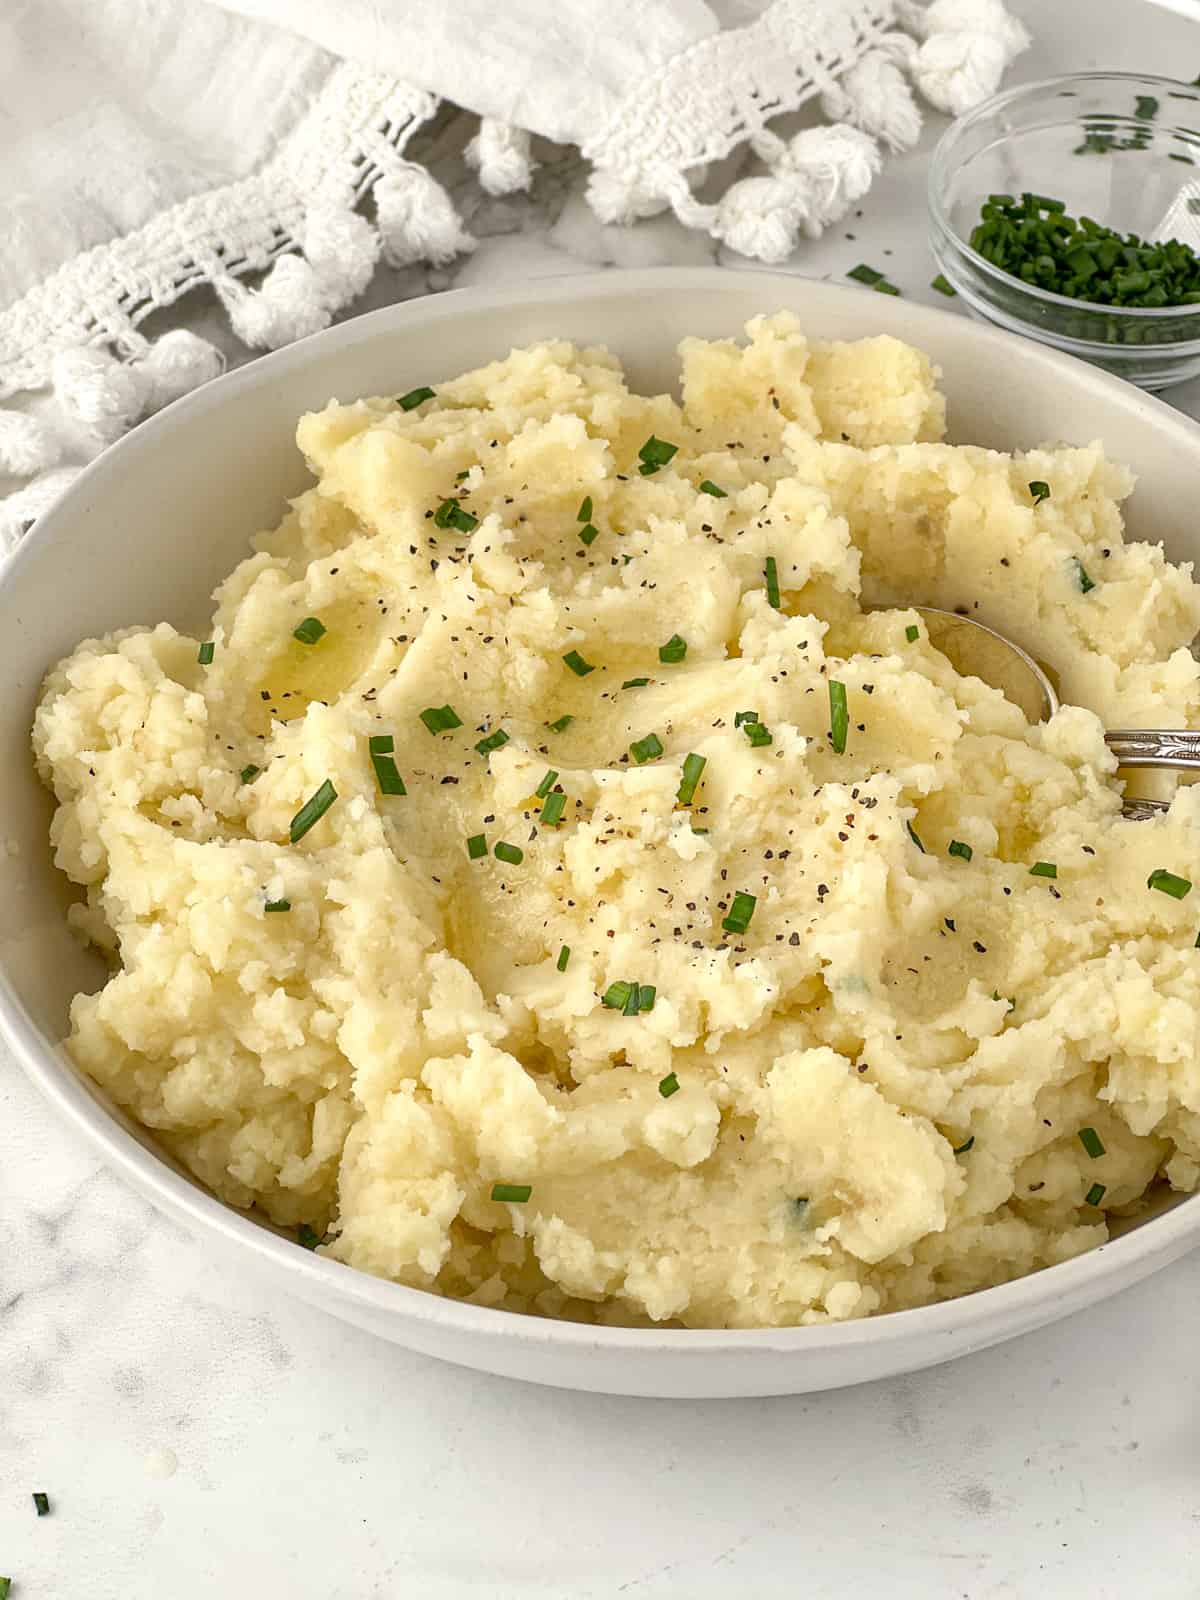 Bowlful of mashed potatoes topped with butter and chopped chives.